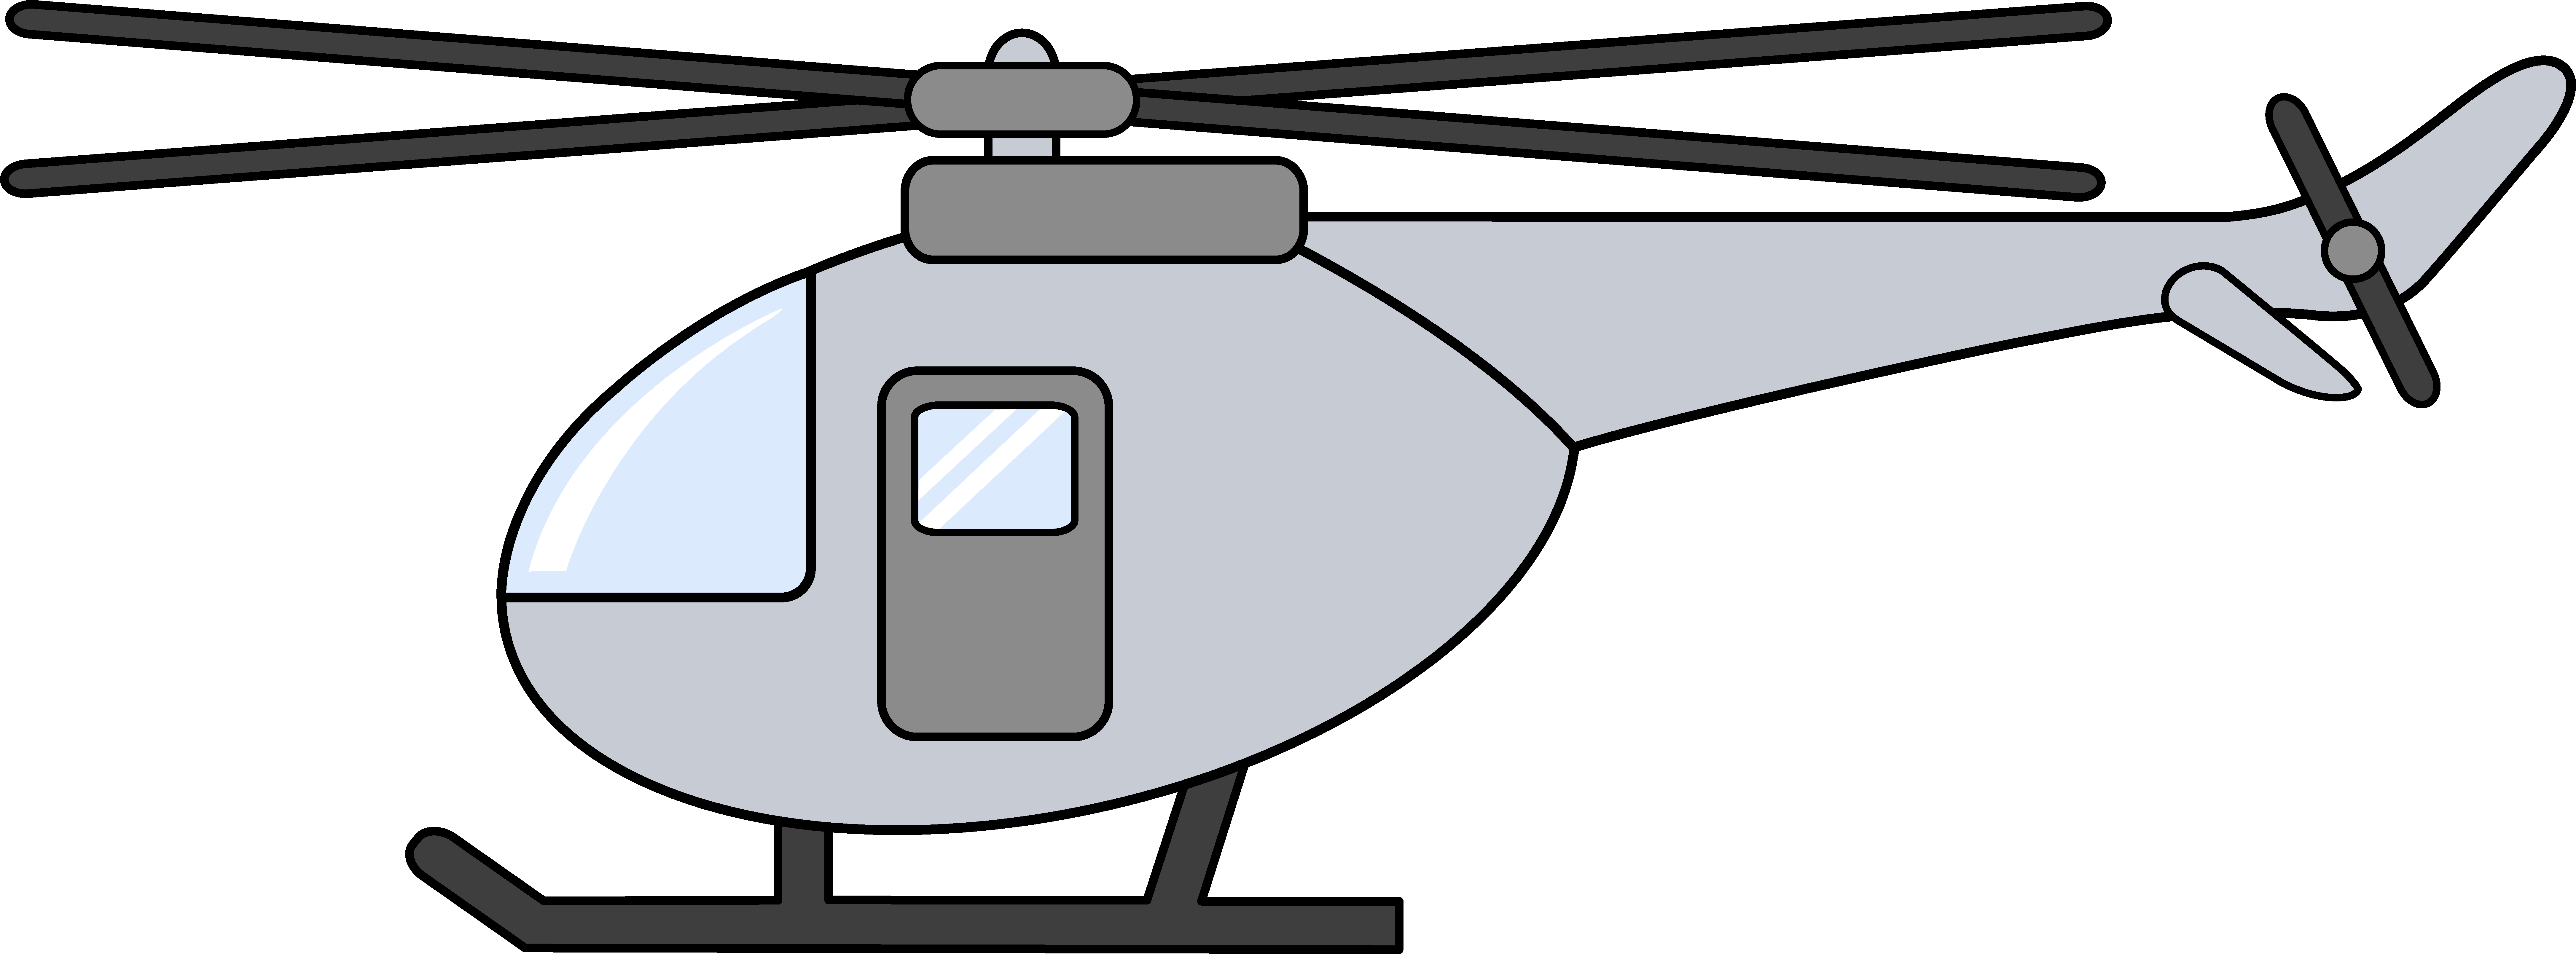 Helicopter clip art free